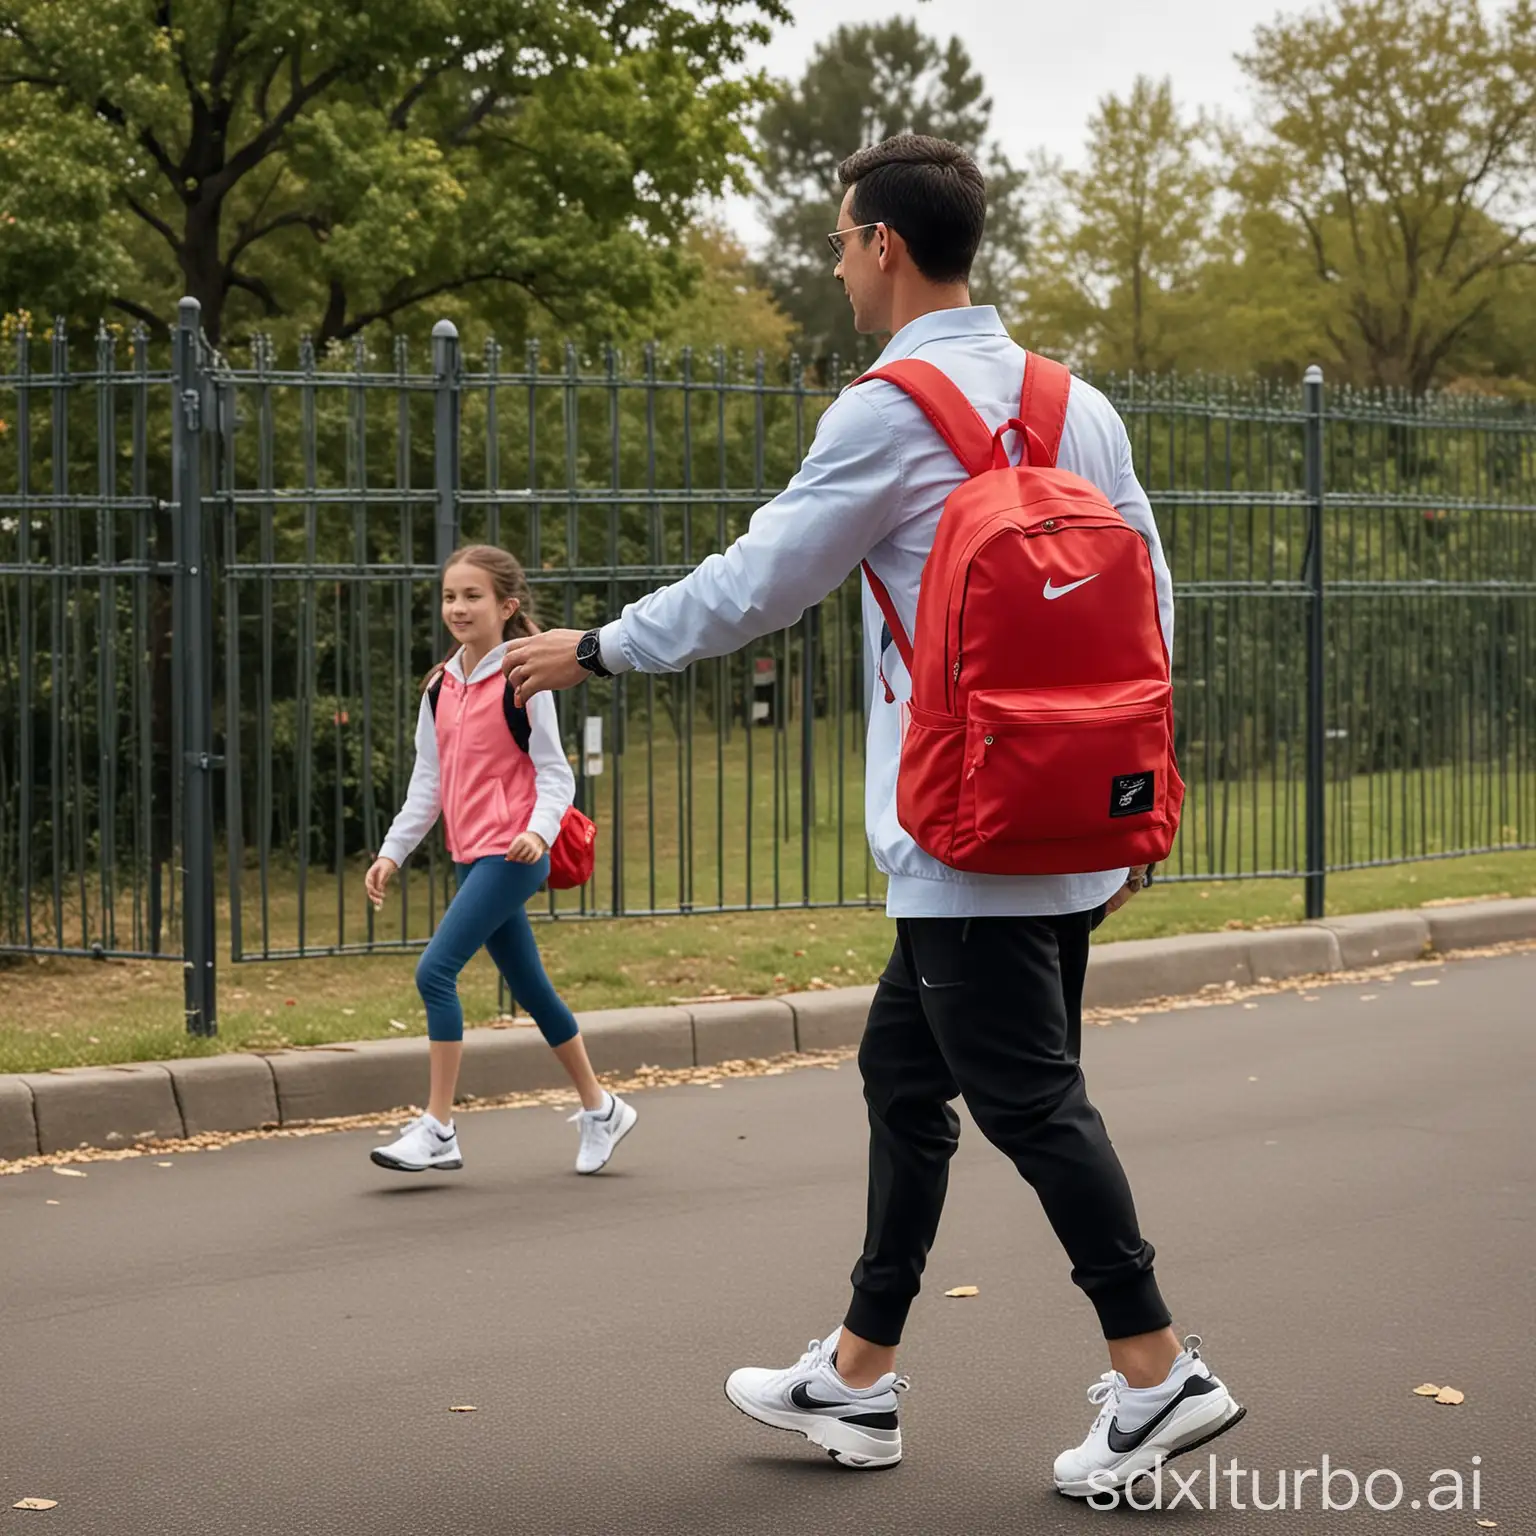 Father-in-Nike-Sportswear-Greets-Daughter-with-Red-Backpack-at-School-Gate